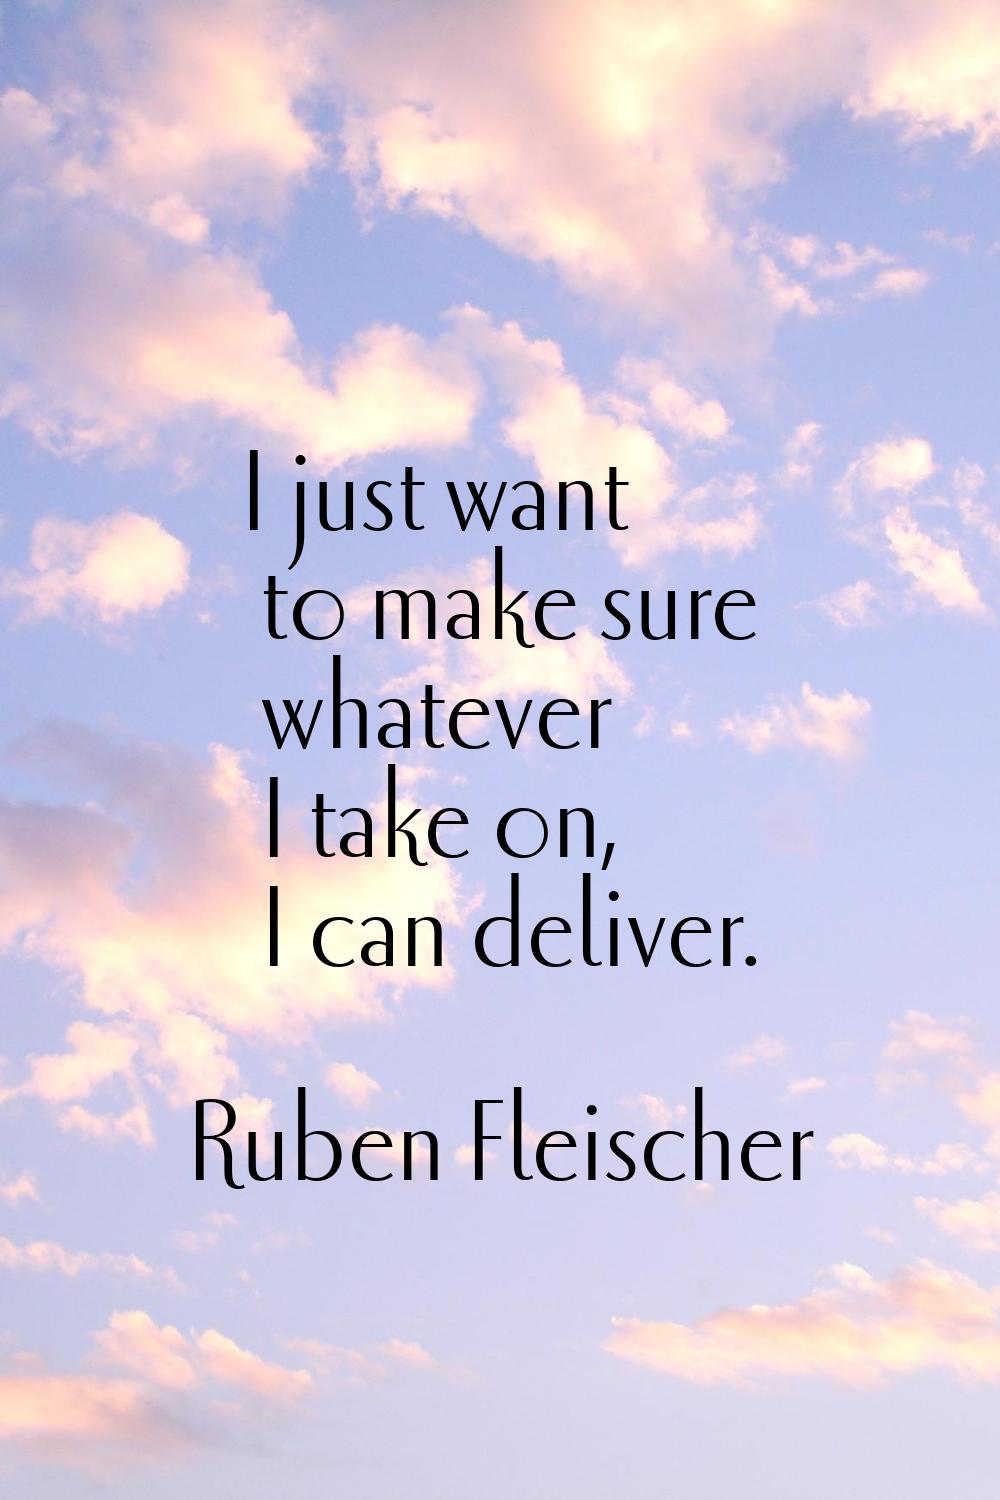 I just want to make sure whatever I take on, I can deliver.